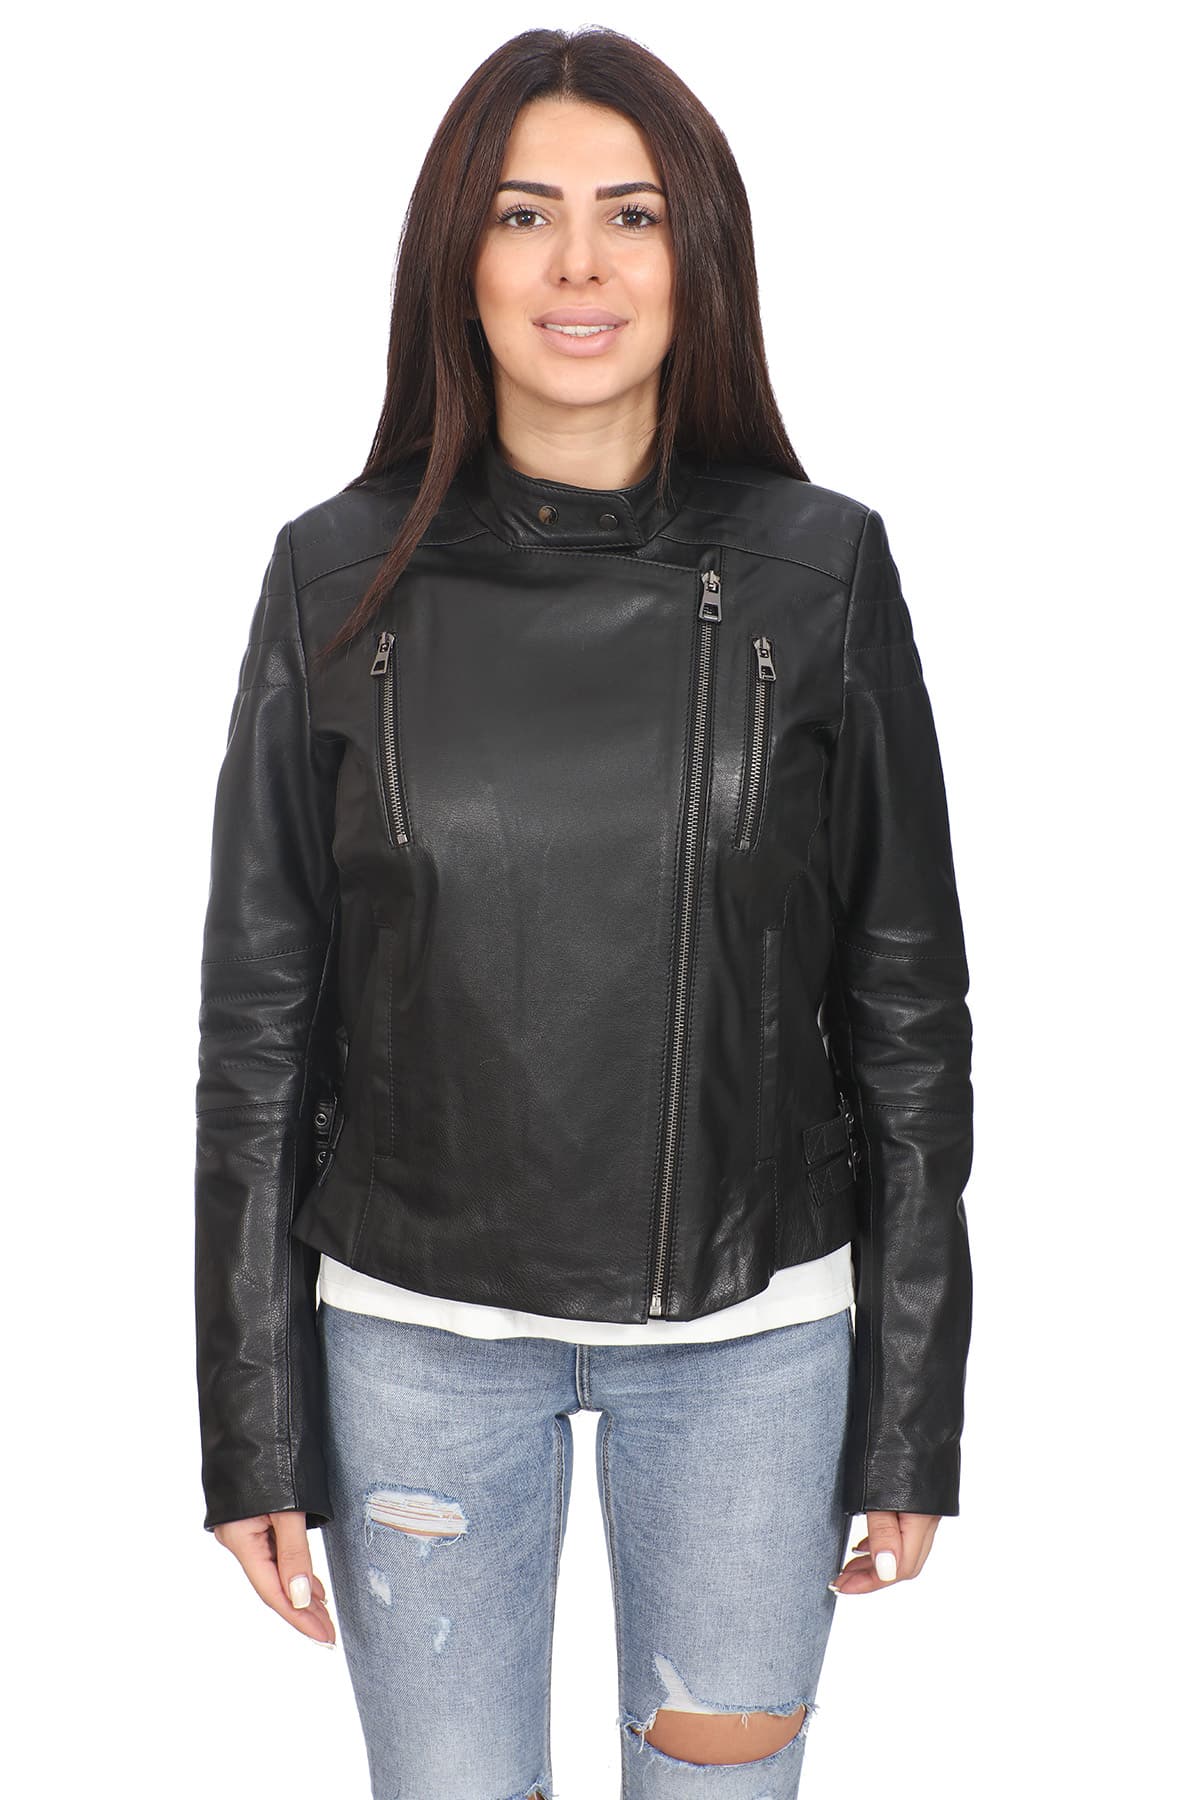 Where To Buy Leather Jackets Near Me